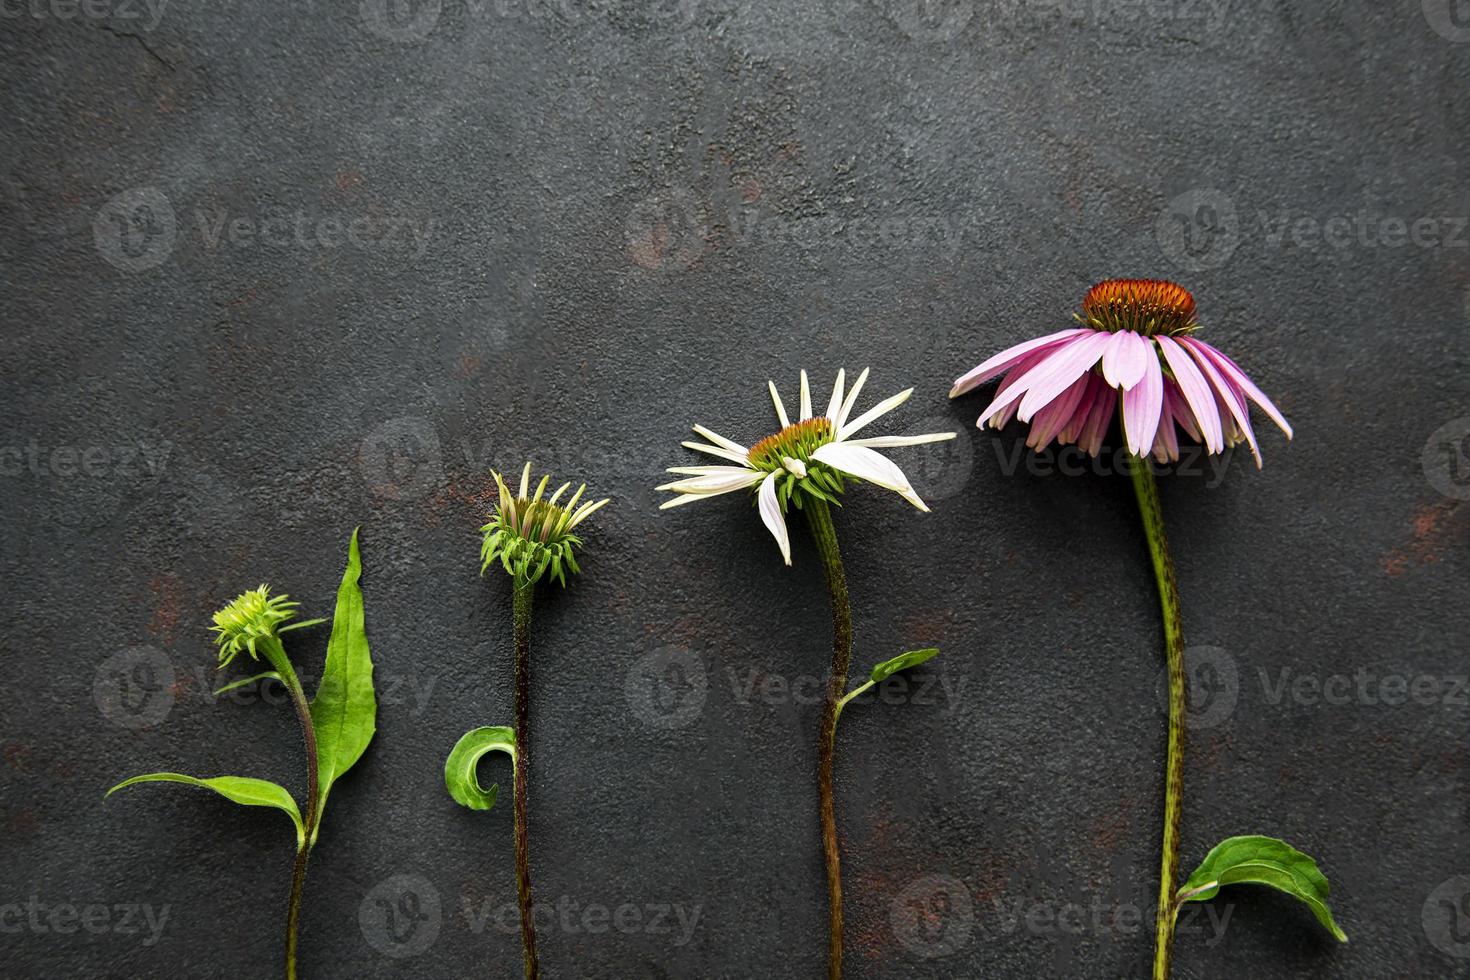 Different stages of growth of echinacea flower photo